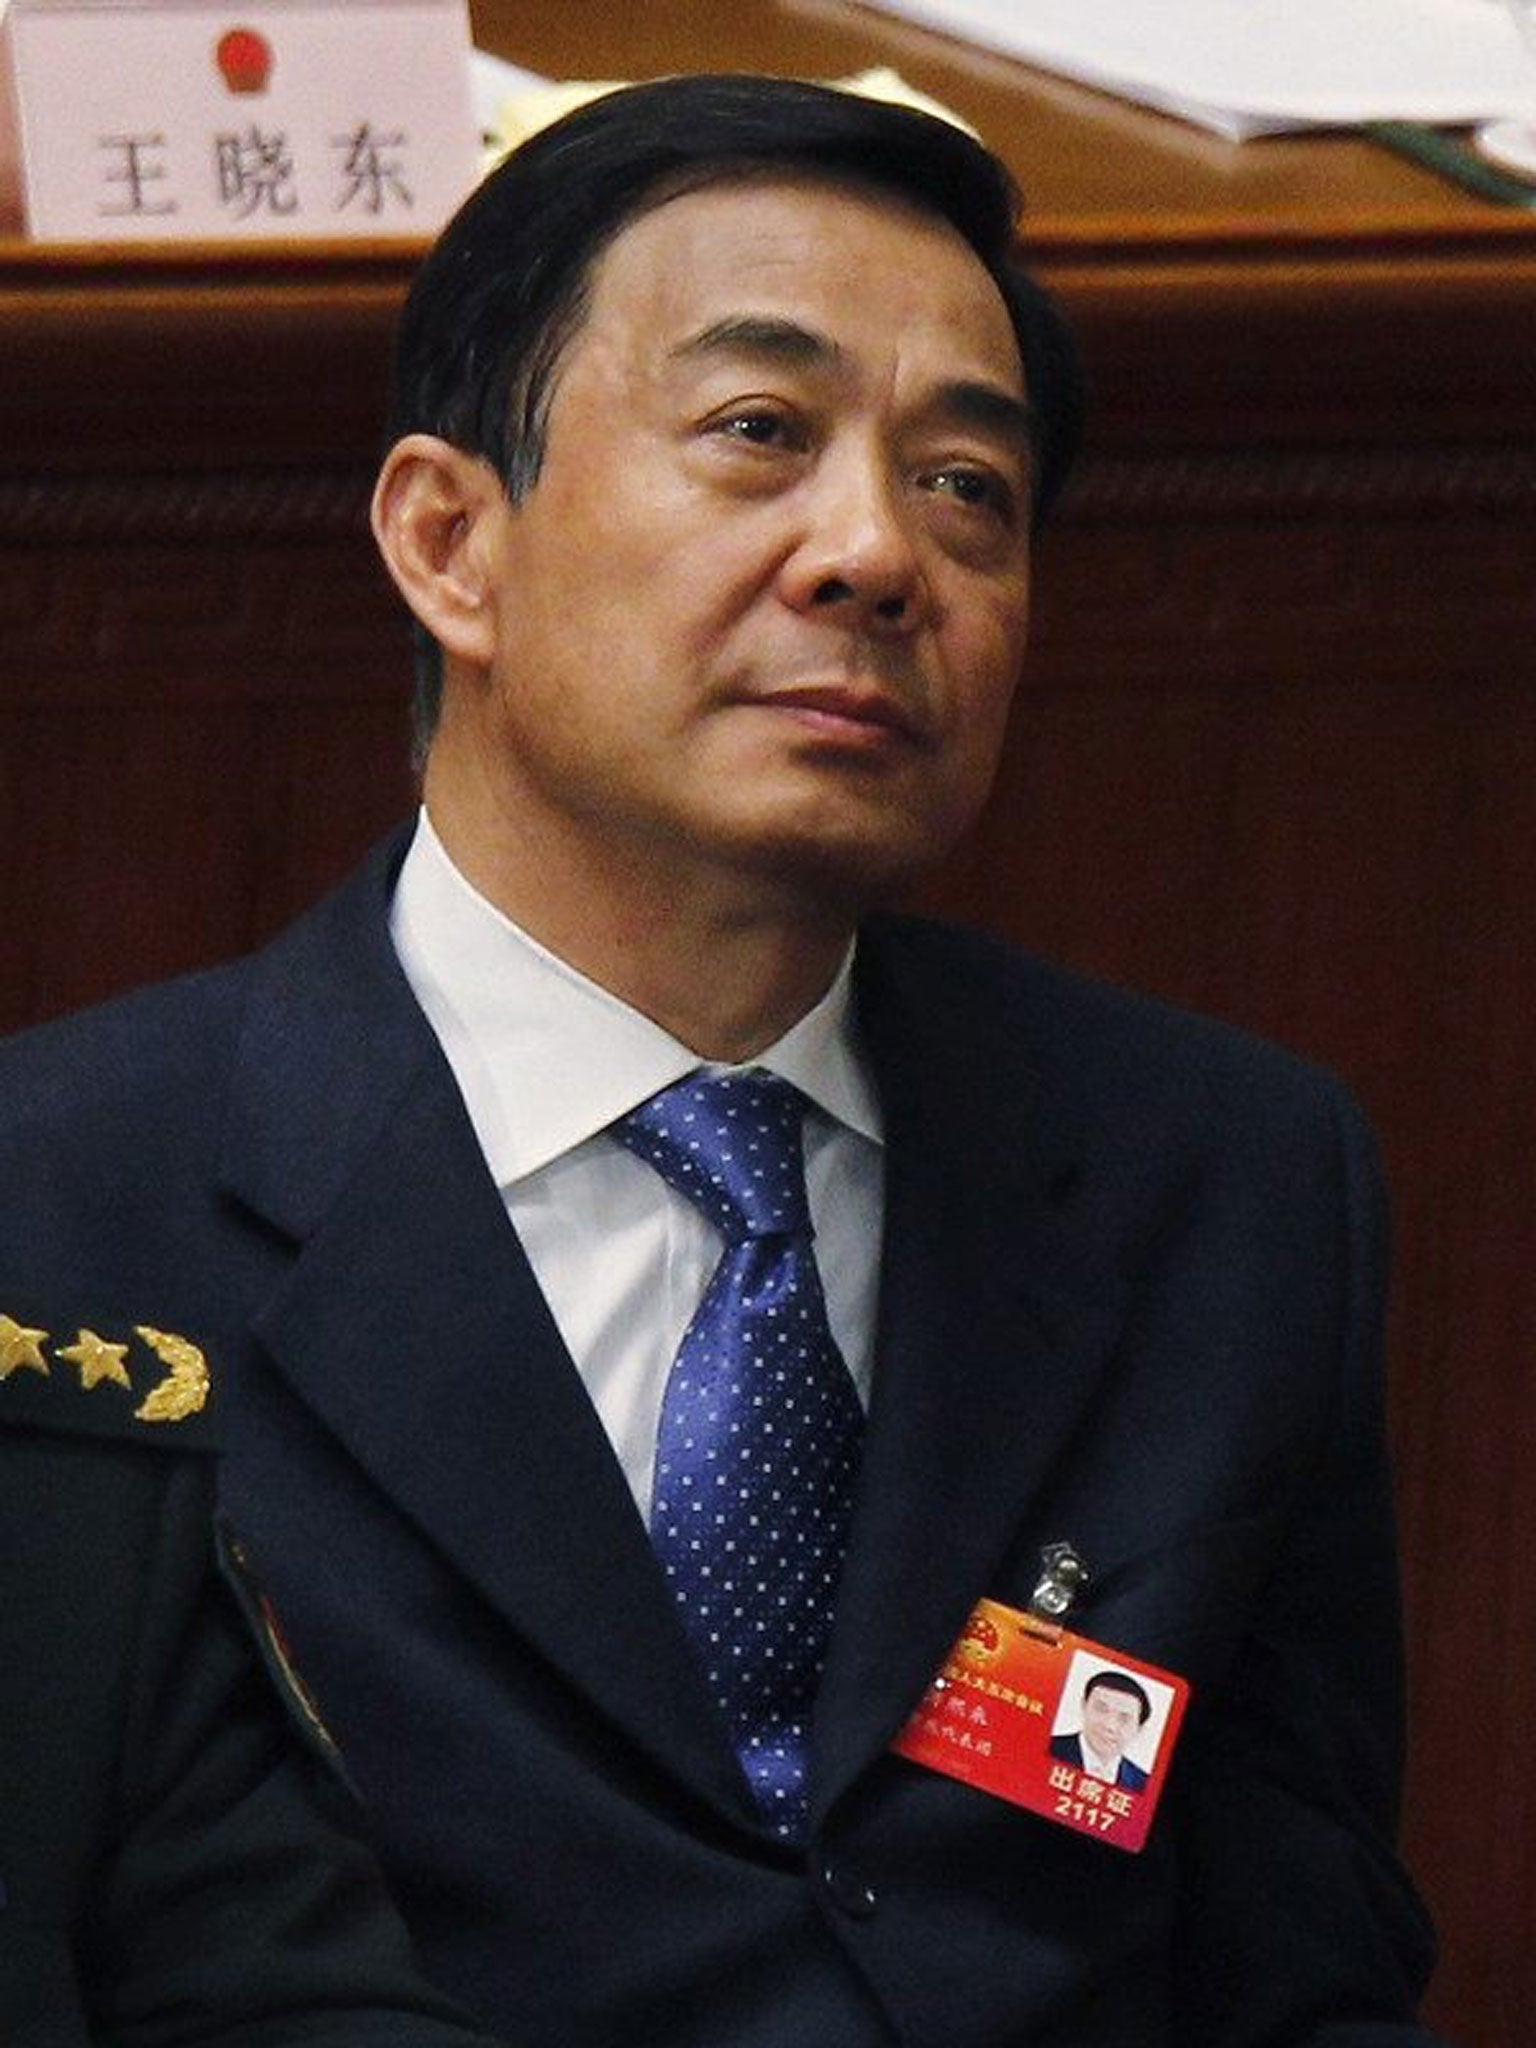 Bo Xilai: A rising star, he was engulfed by his wife's scandal